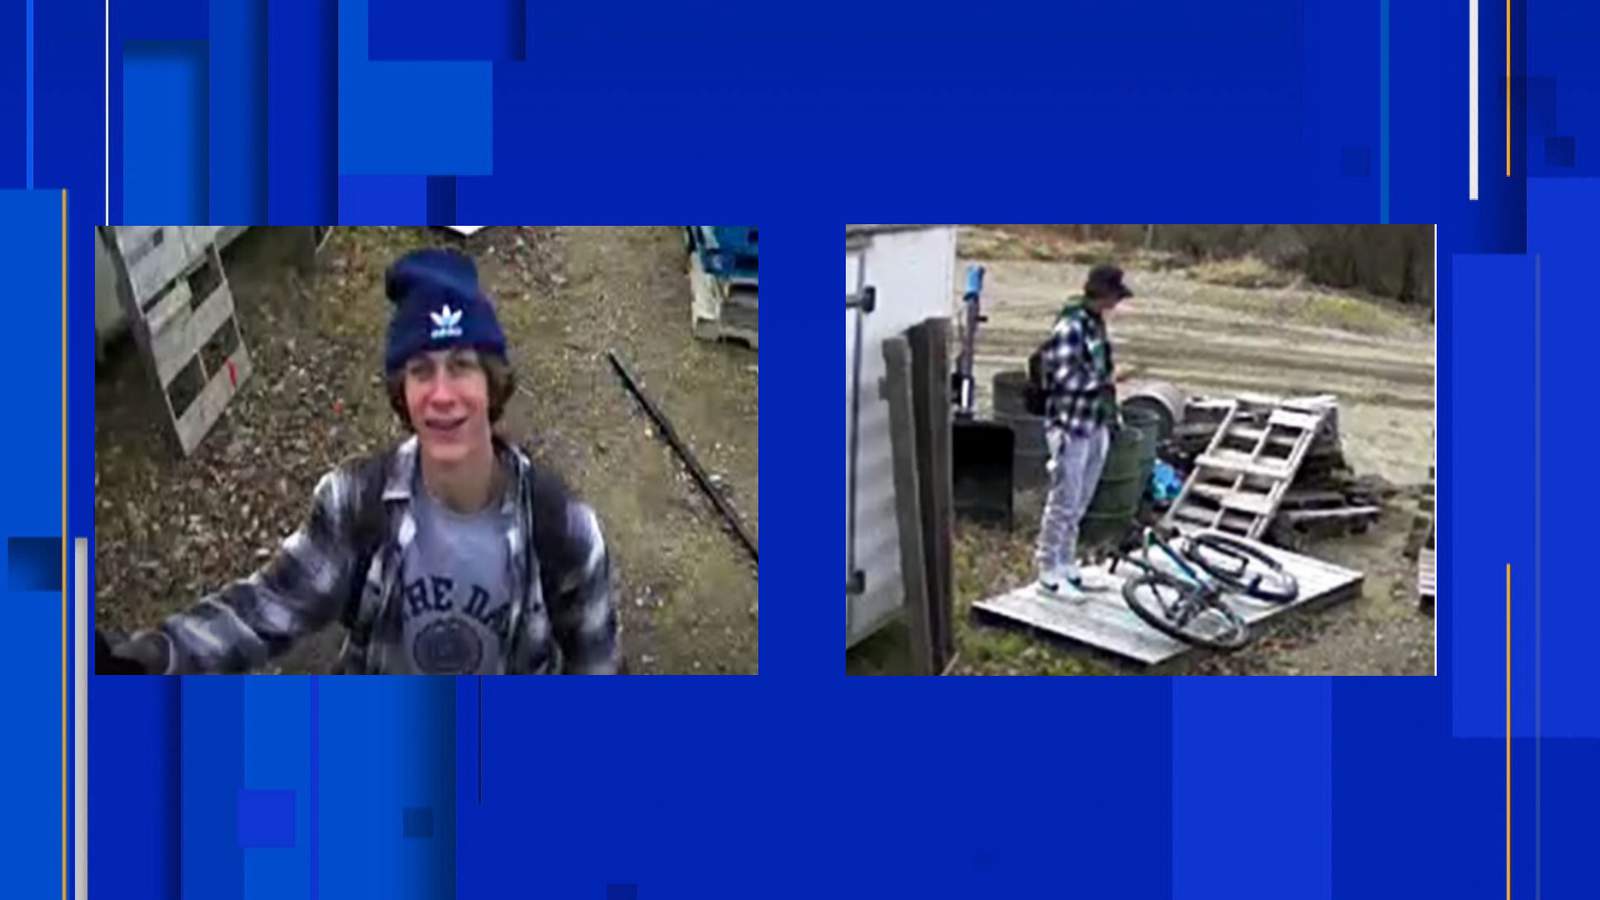 Northville Township police searching for person in connection to theft, property damage